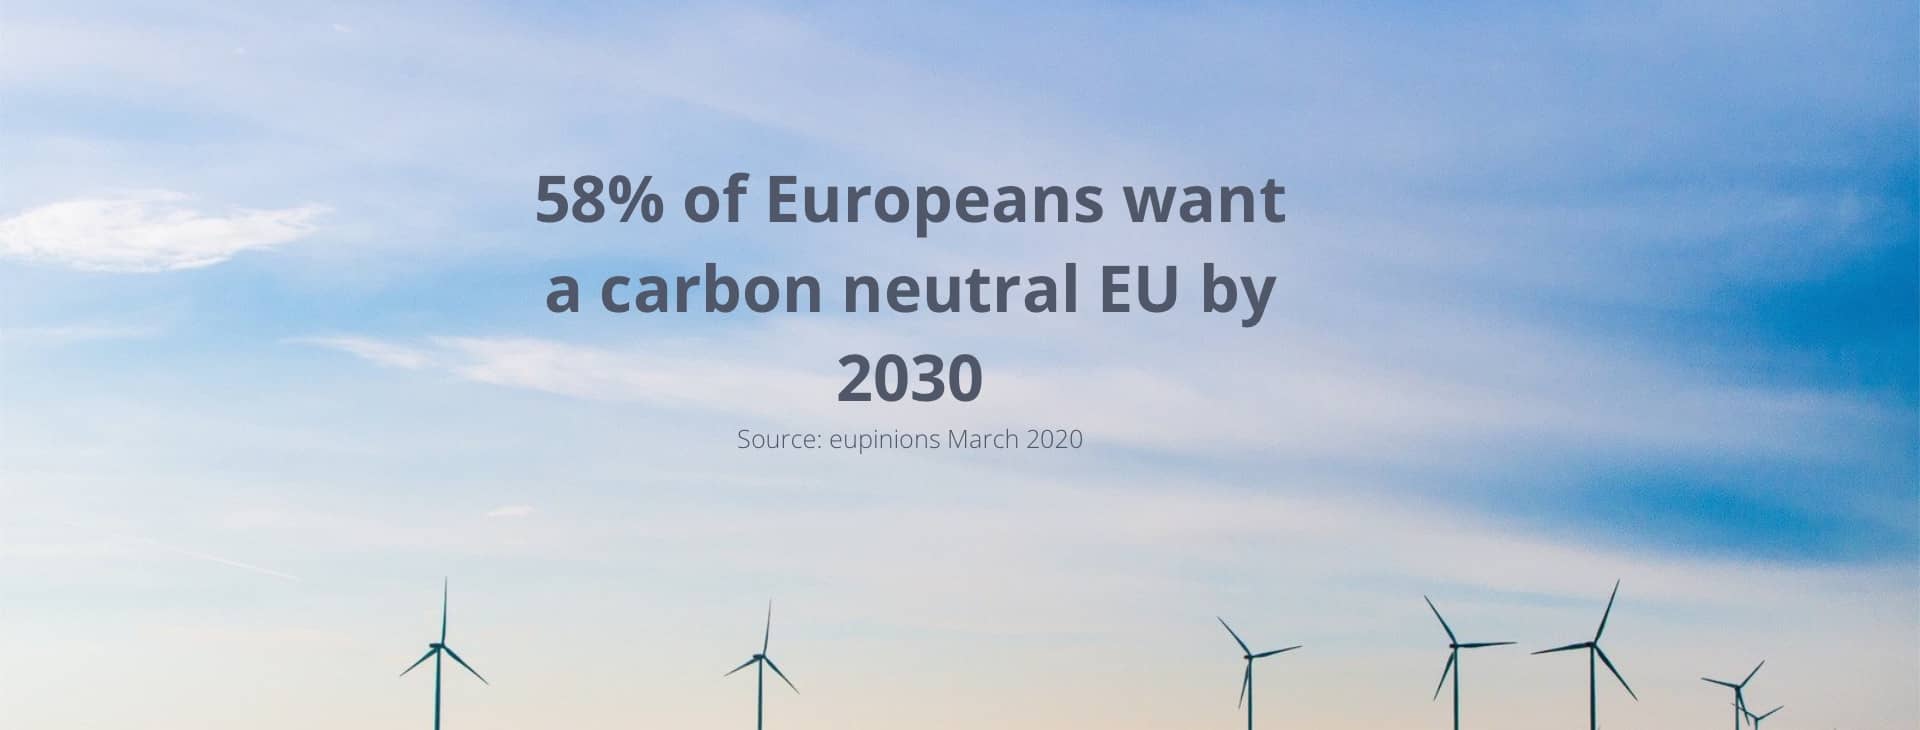 58% of Europeans want a carbon neutral EU by 2030 - Source: eupinions March 2020